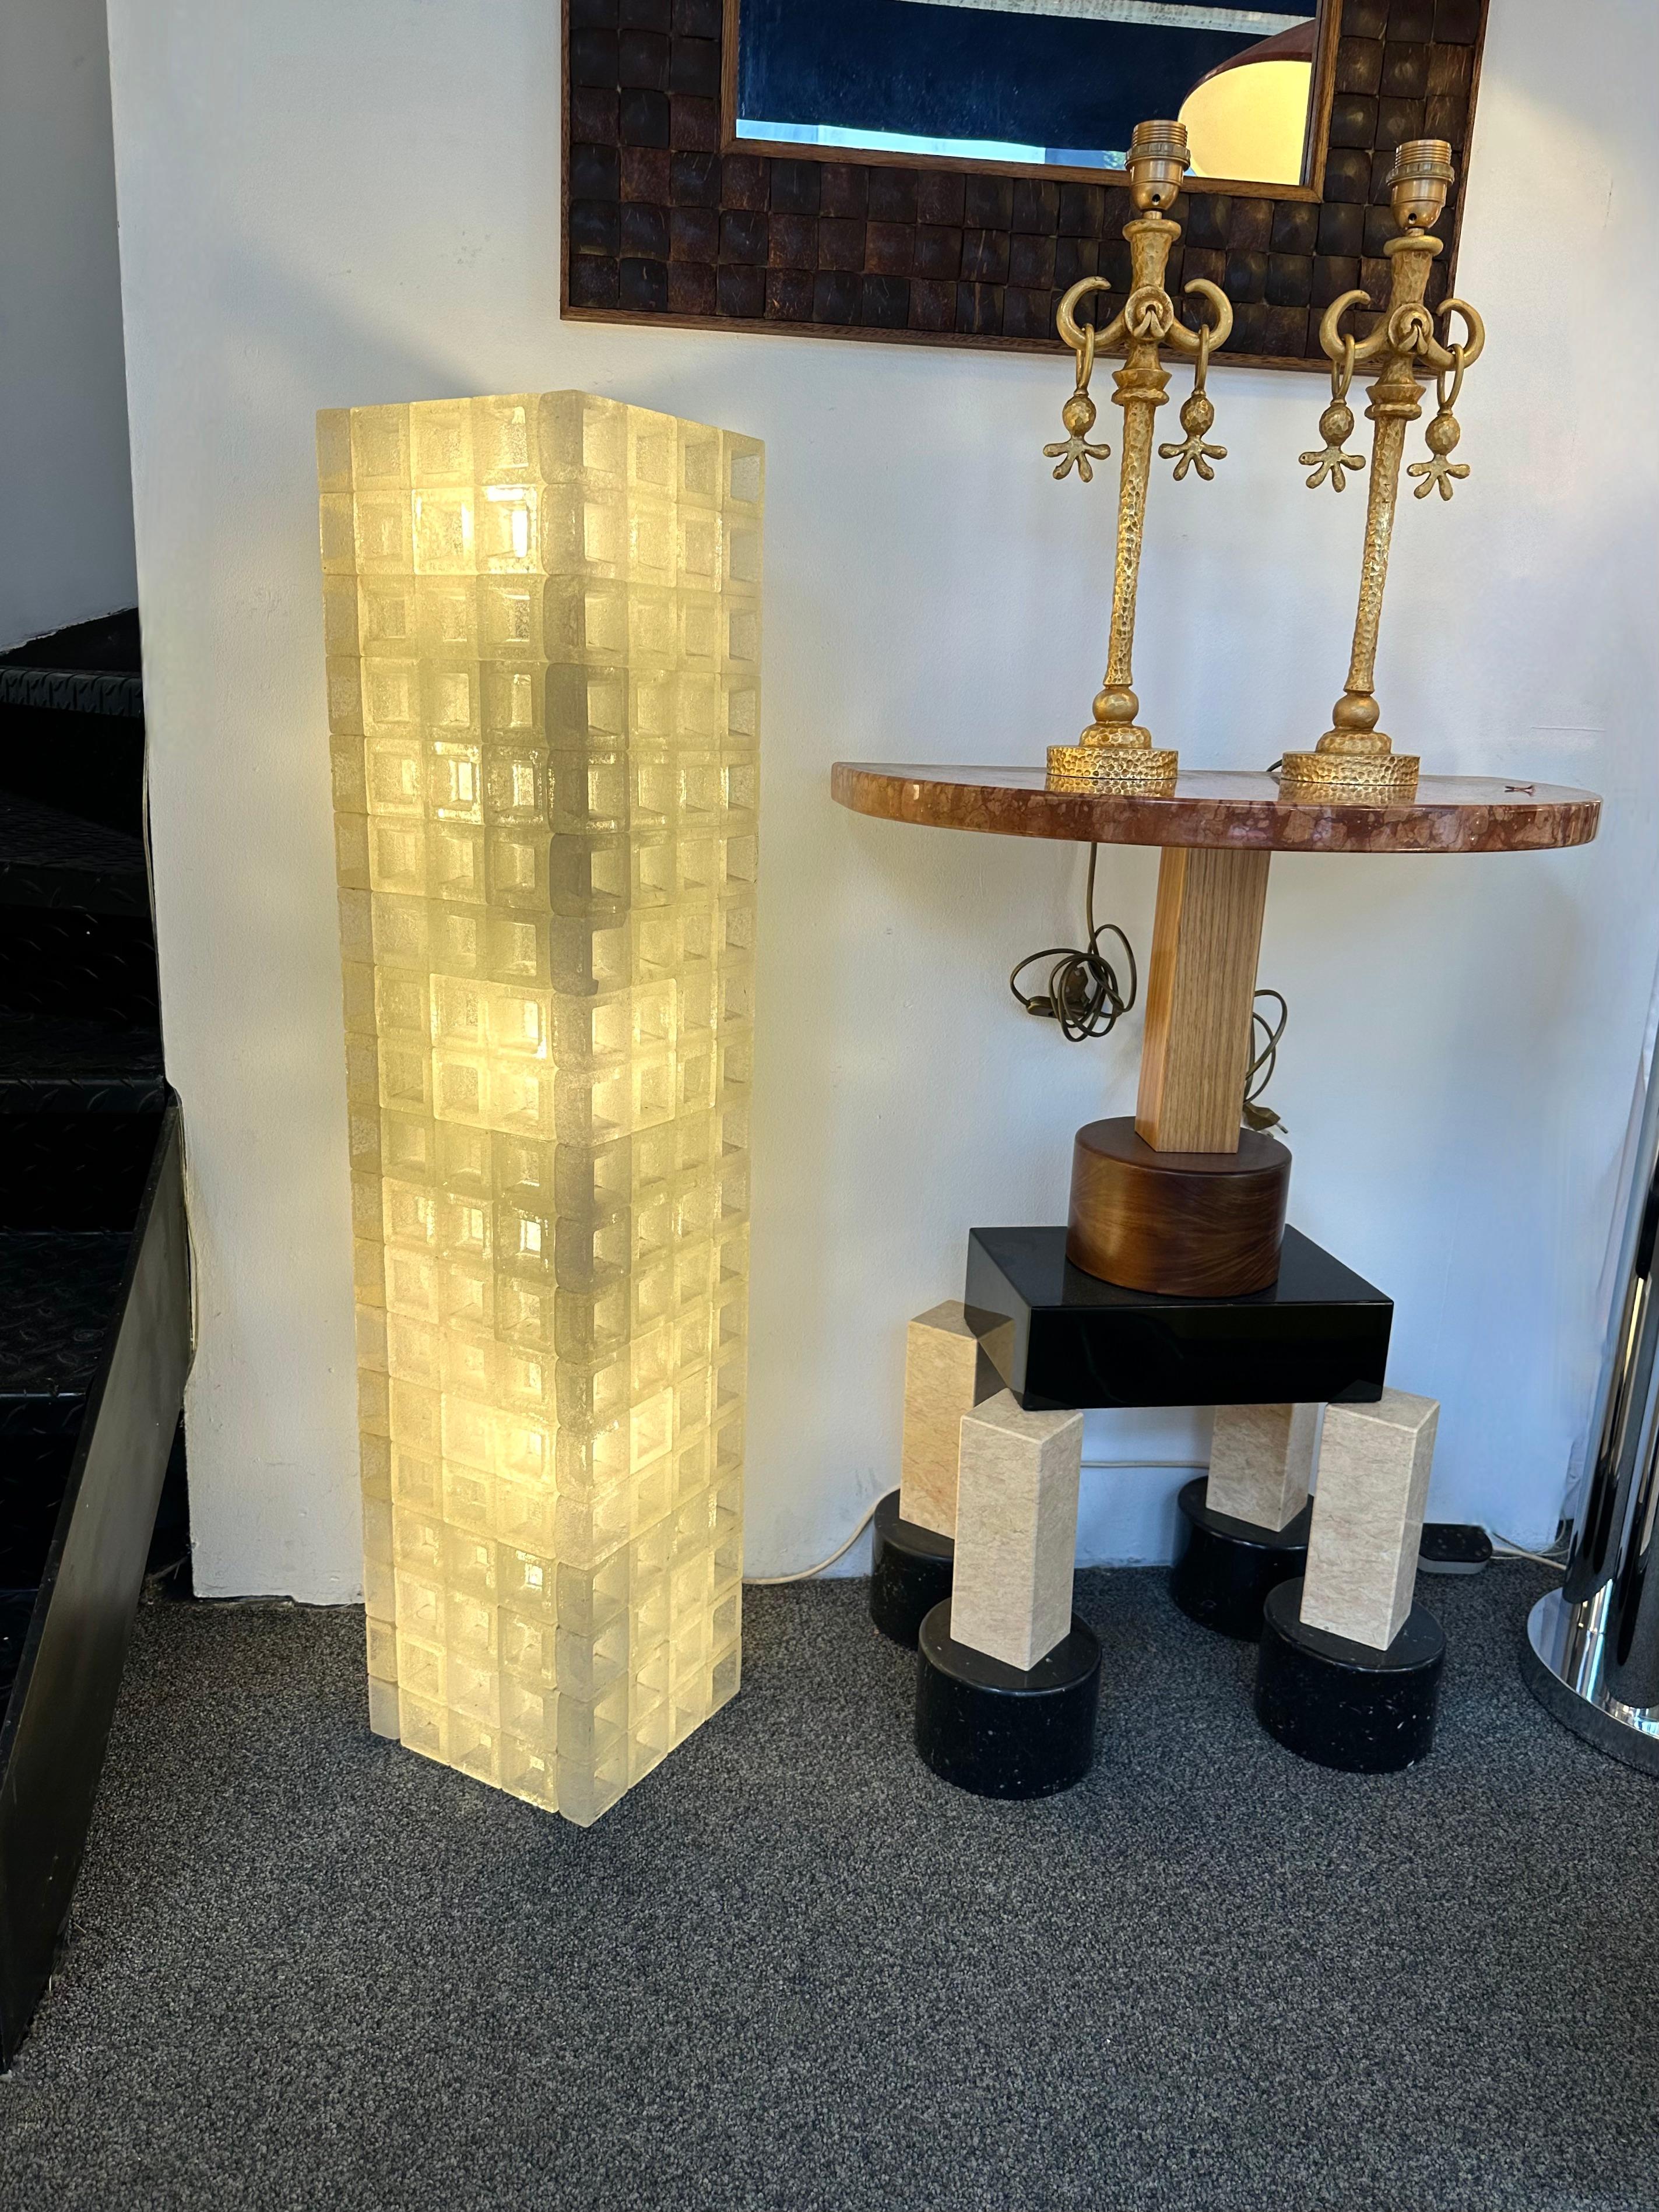 Pressed Mid-Century Modern Glass Cube Tower Floor Lamp by Poliarte, Italy, 1970s For Sale